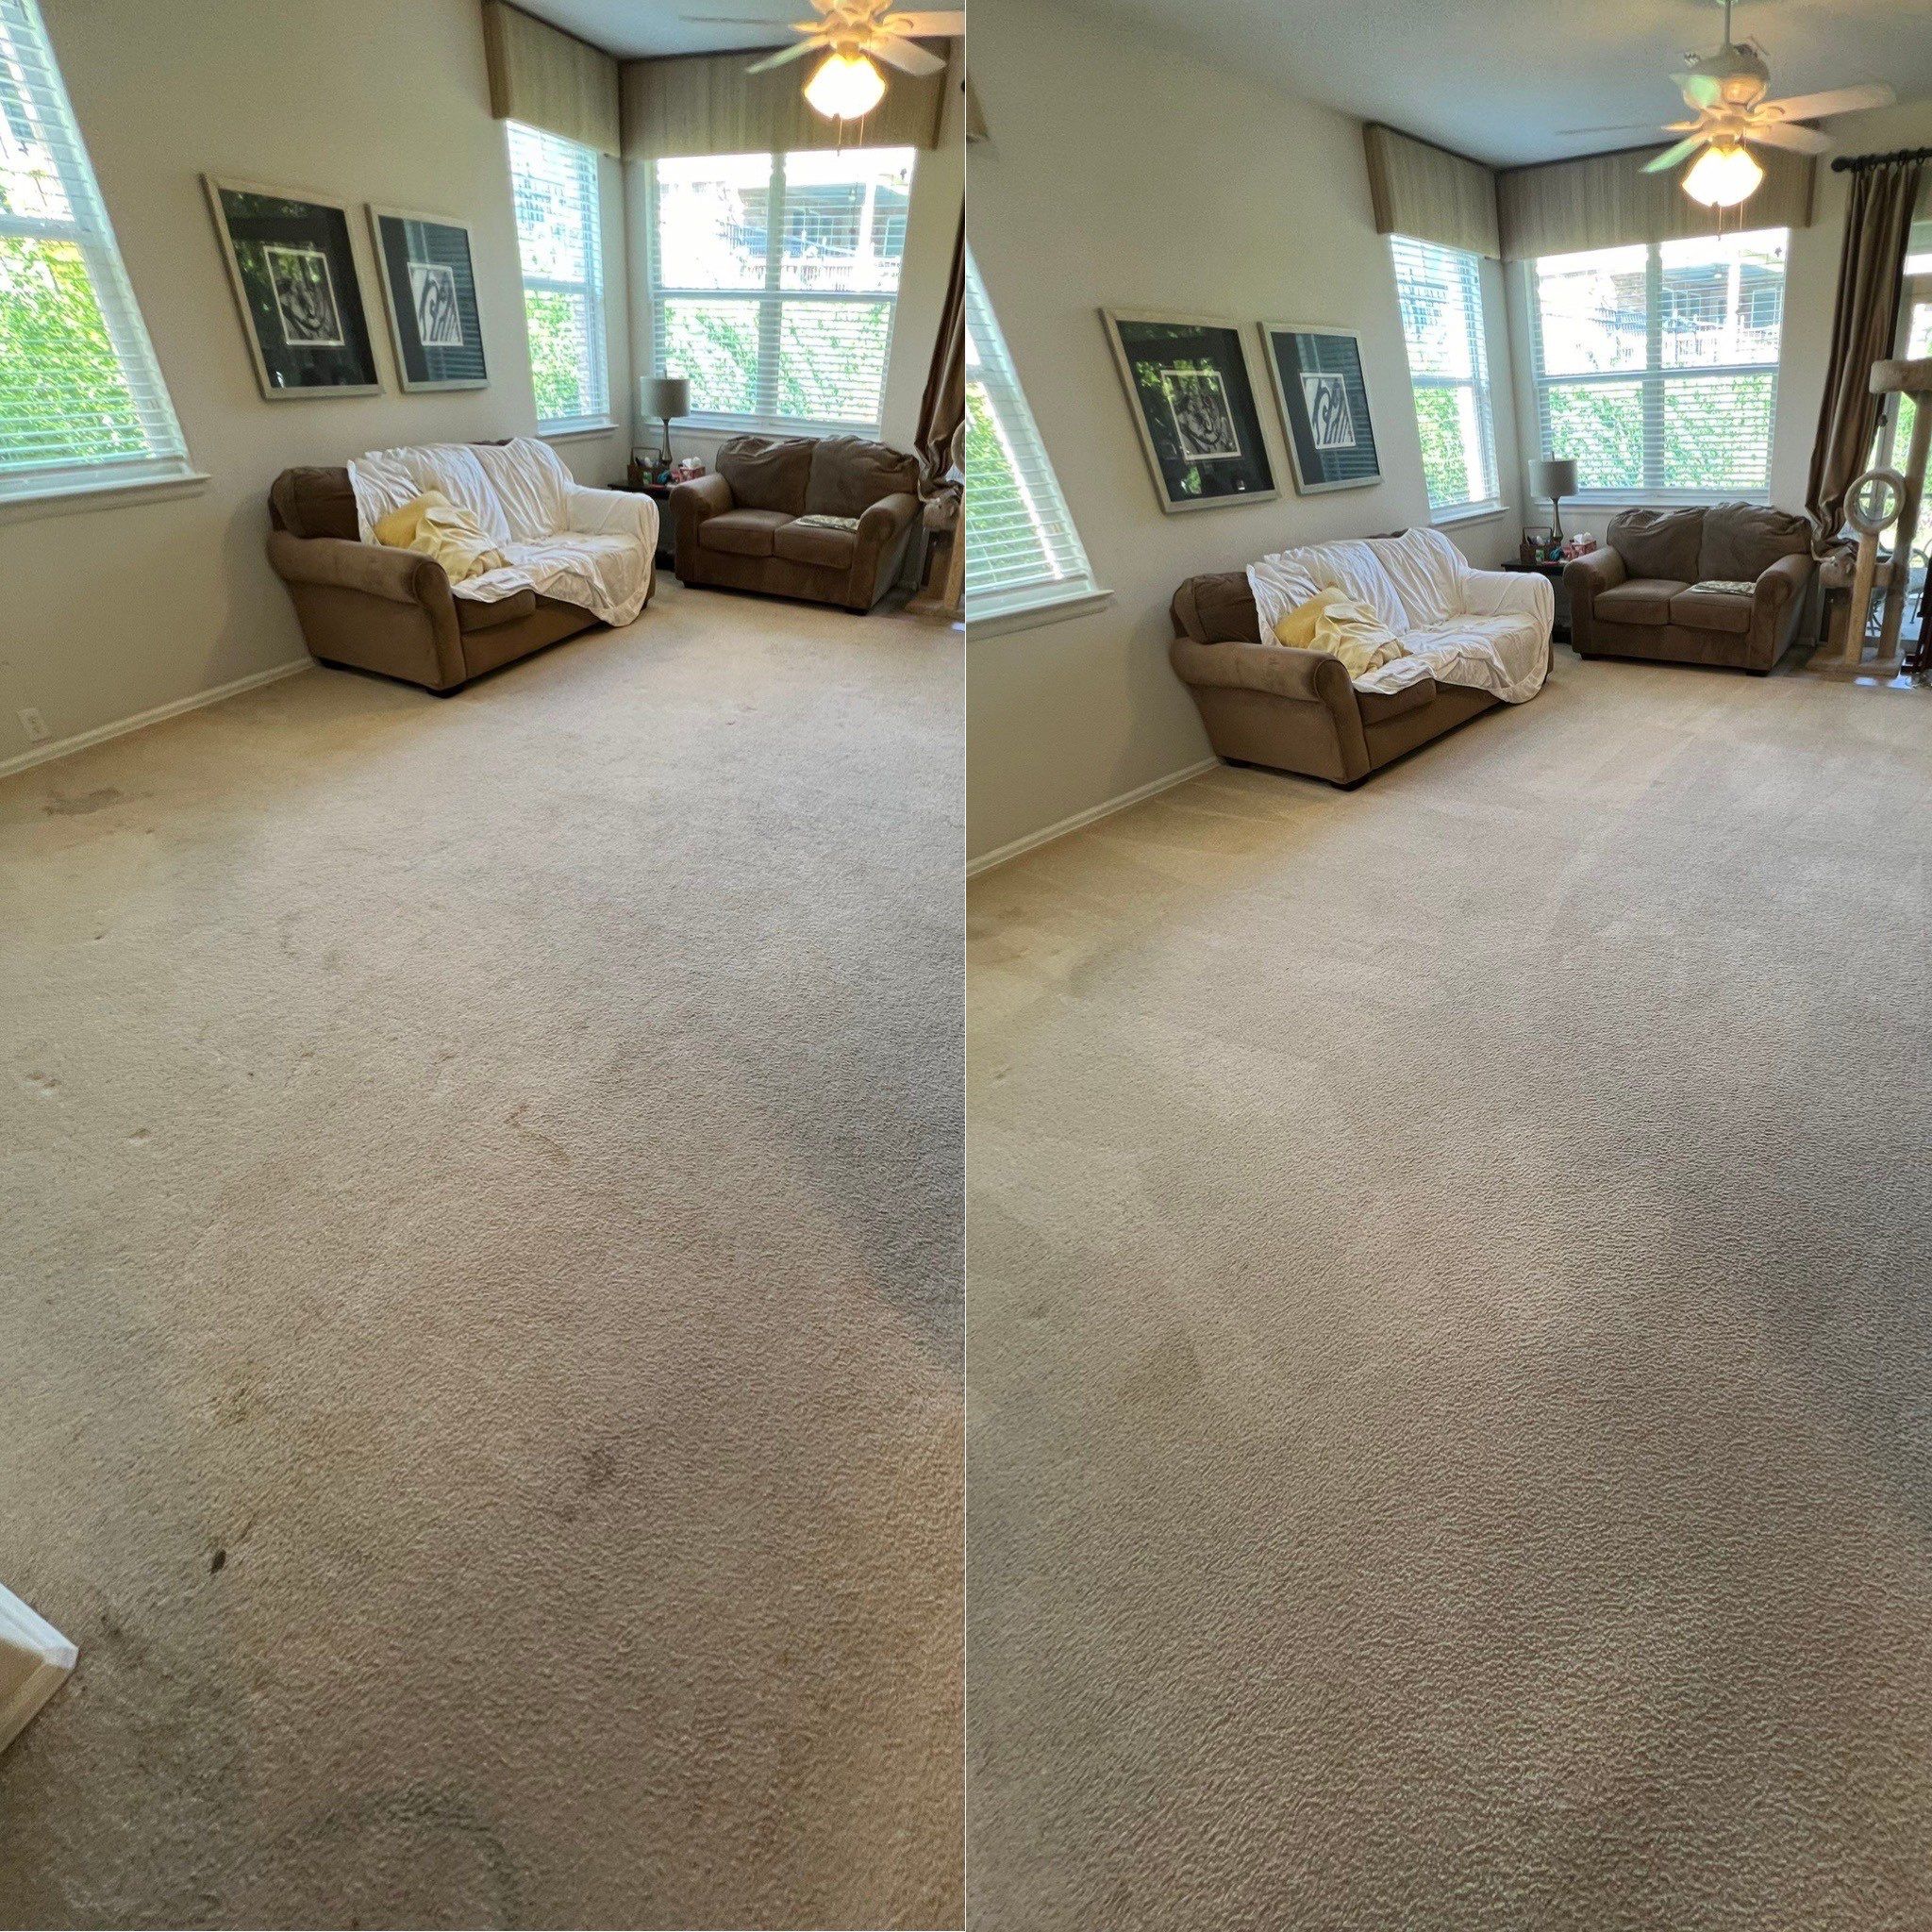 carpet cleaning service showing before and after results with visibly cleaner living room carpet in san antonio home